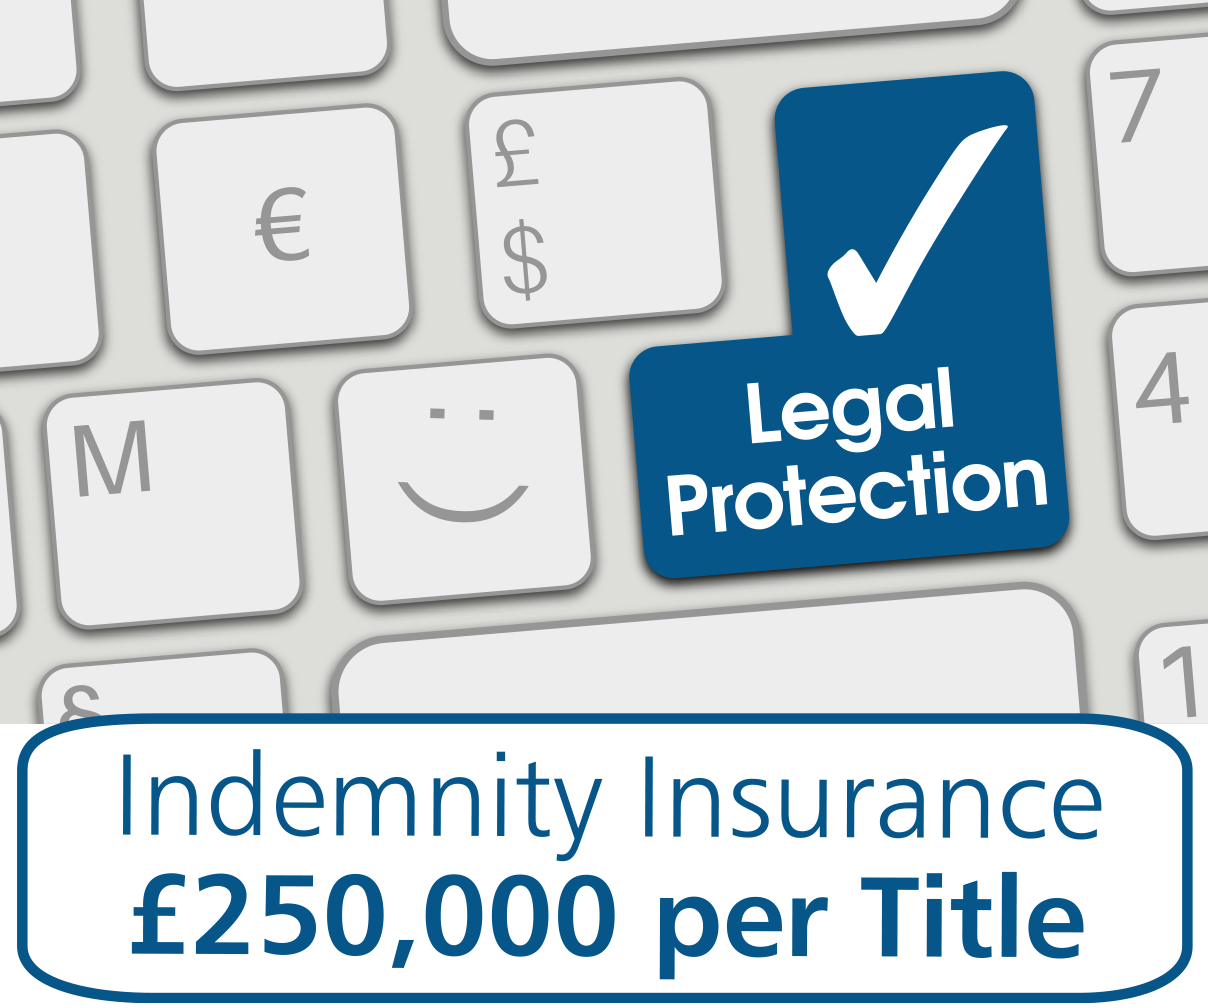 Indemnity Insurance Included £250,000